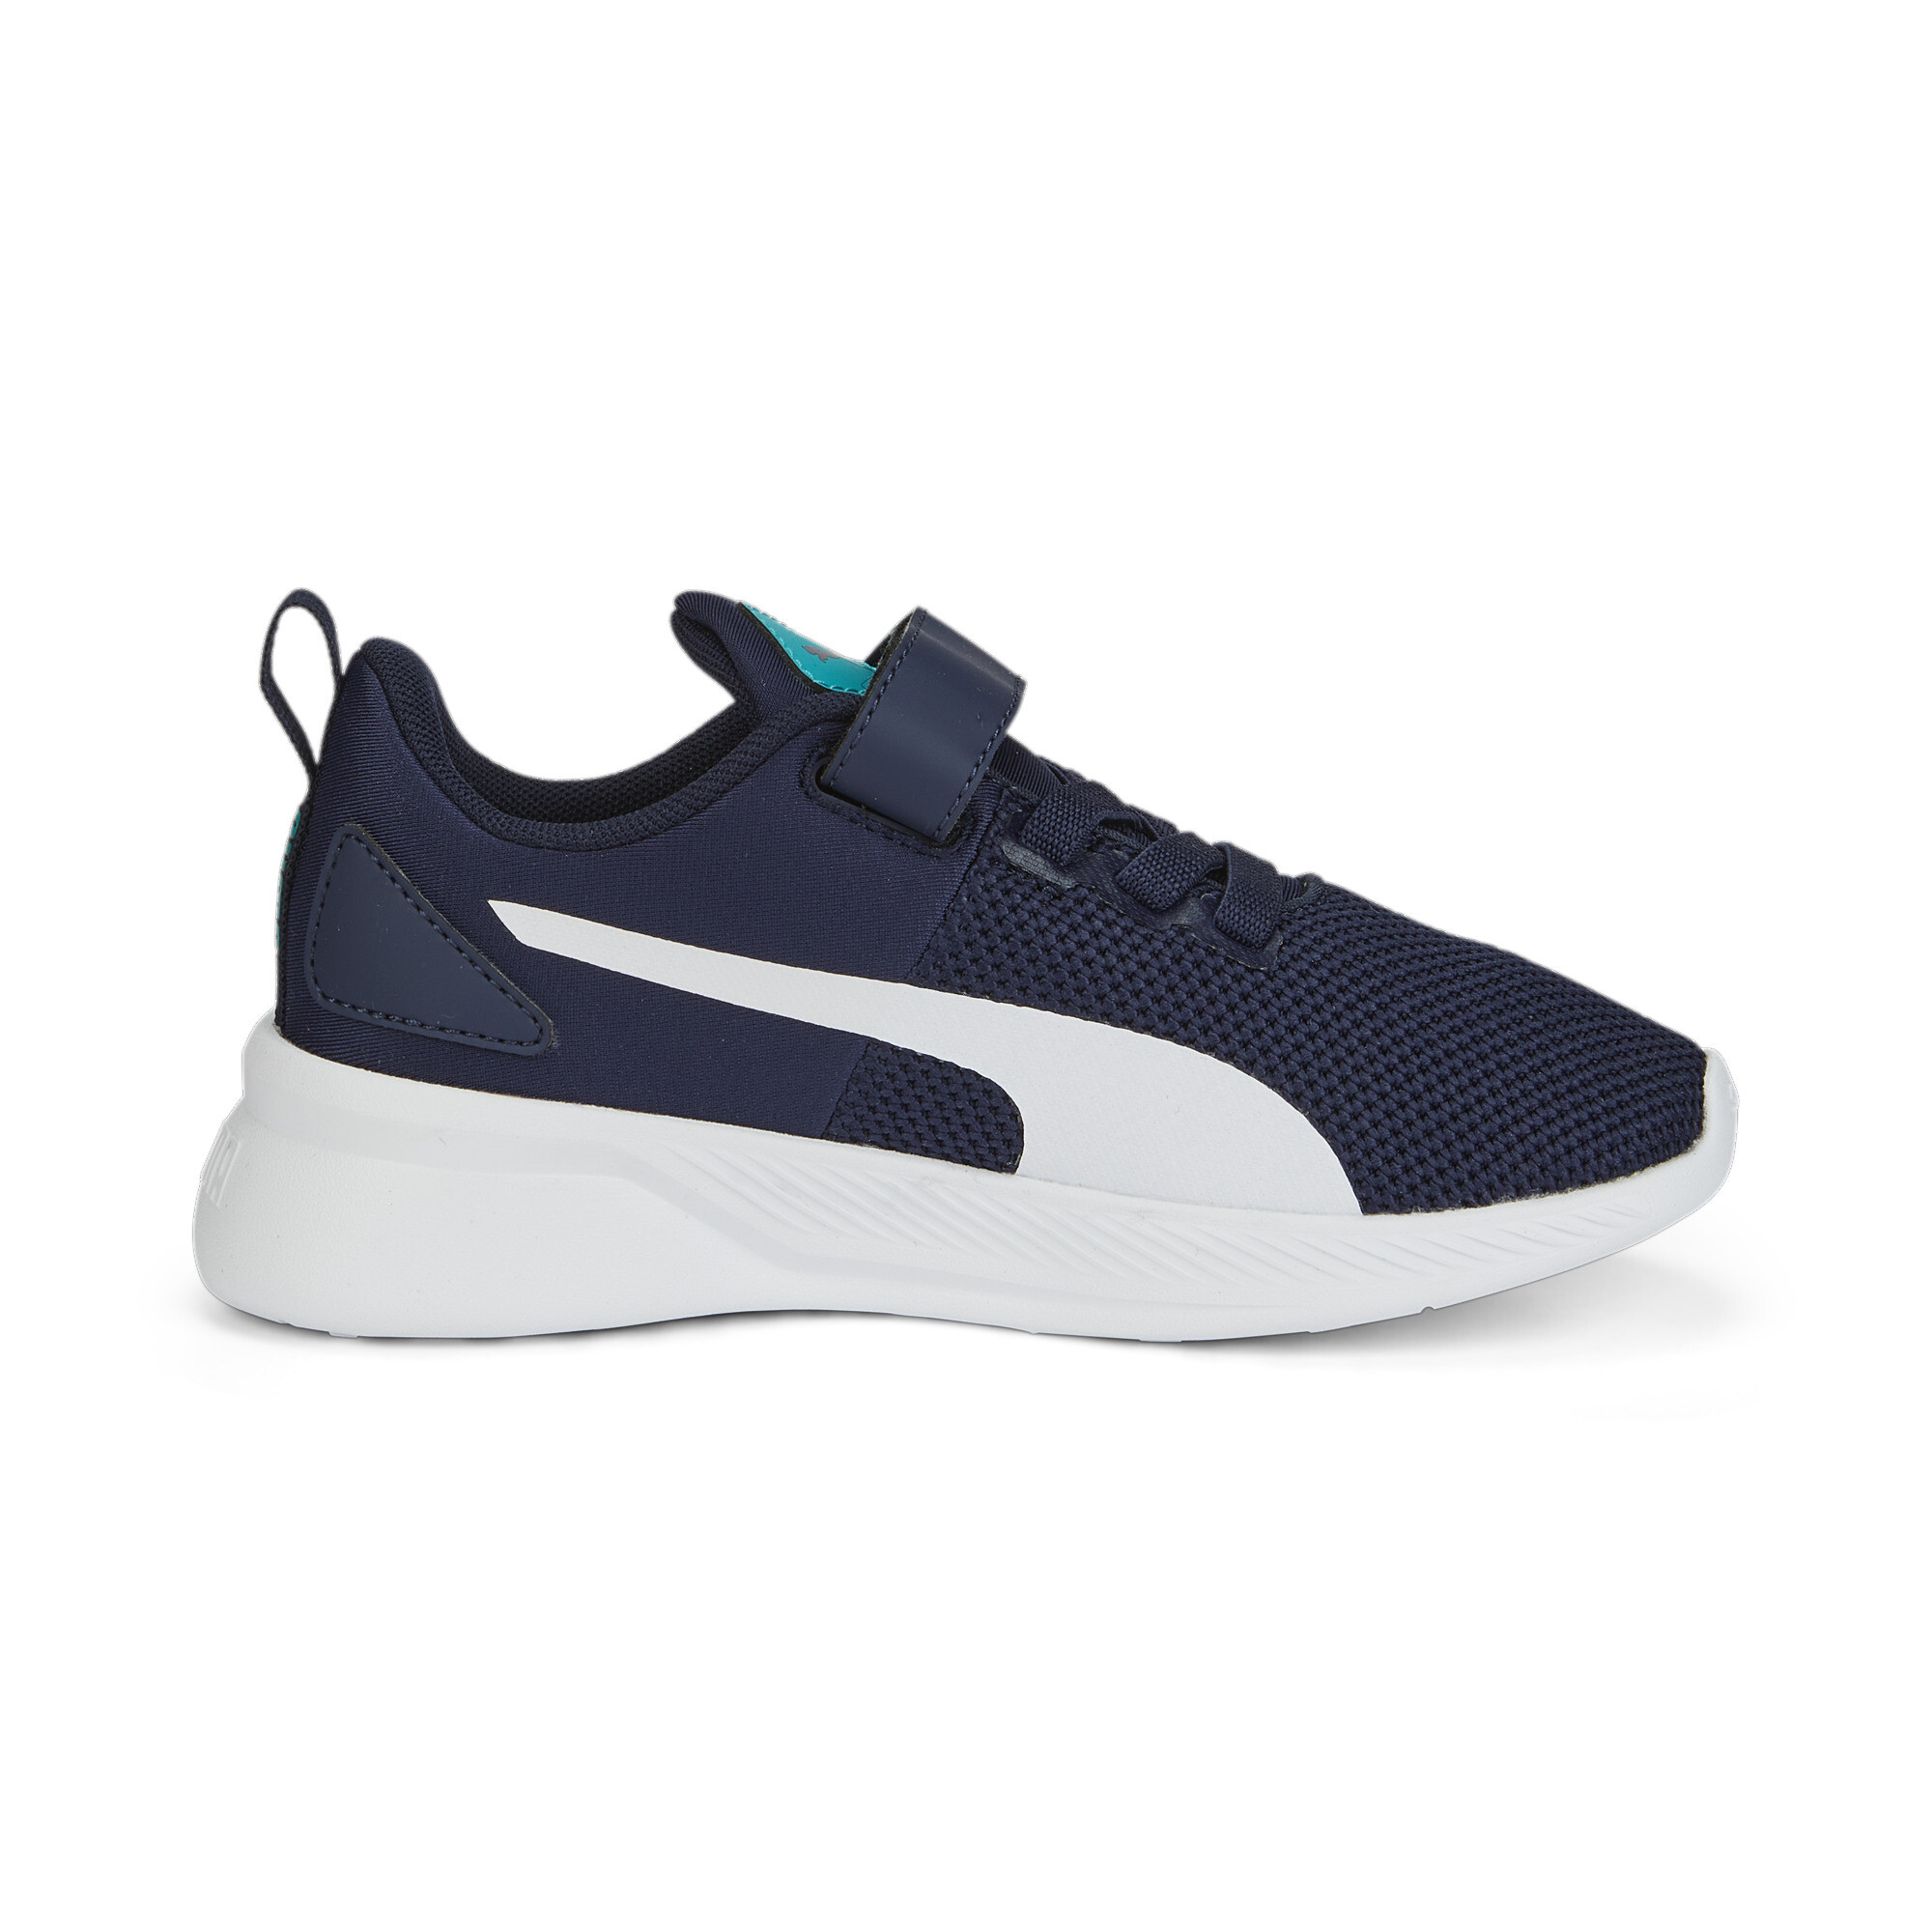 Kids' PUMA Flyer Runner V Trainers Shoes In Blue, Size EU 34